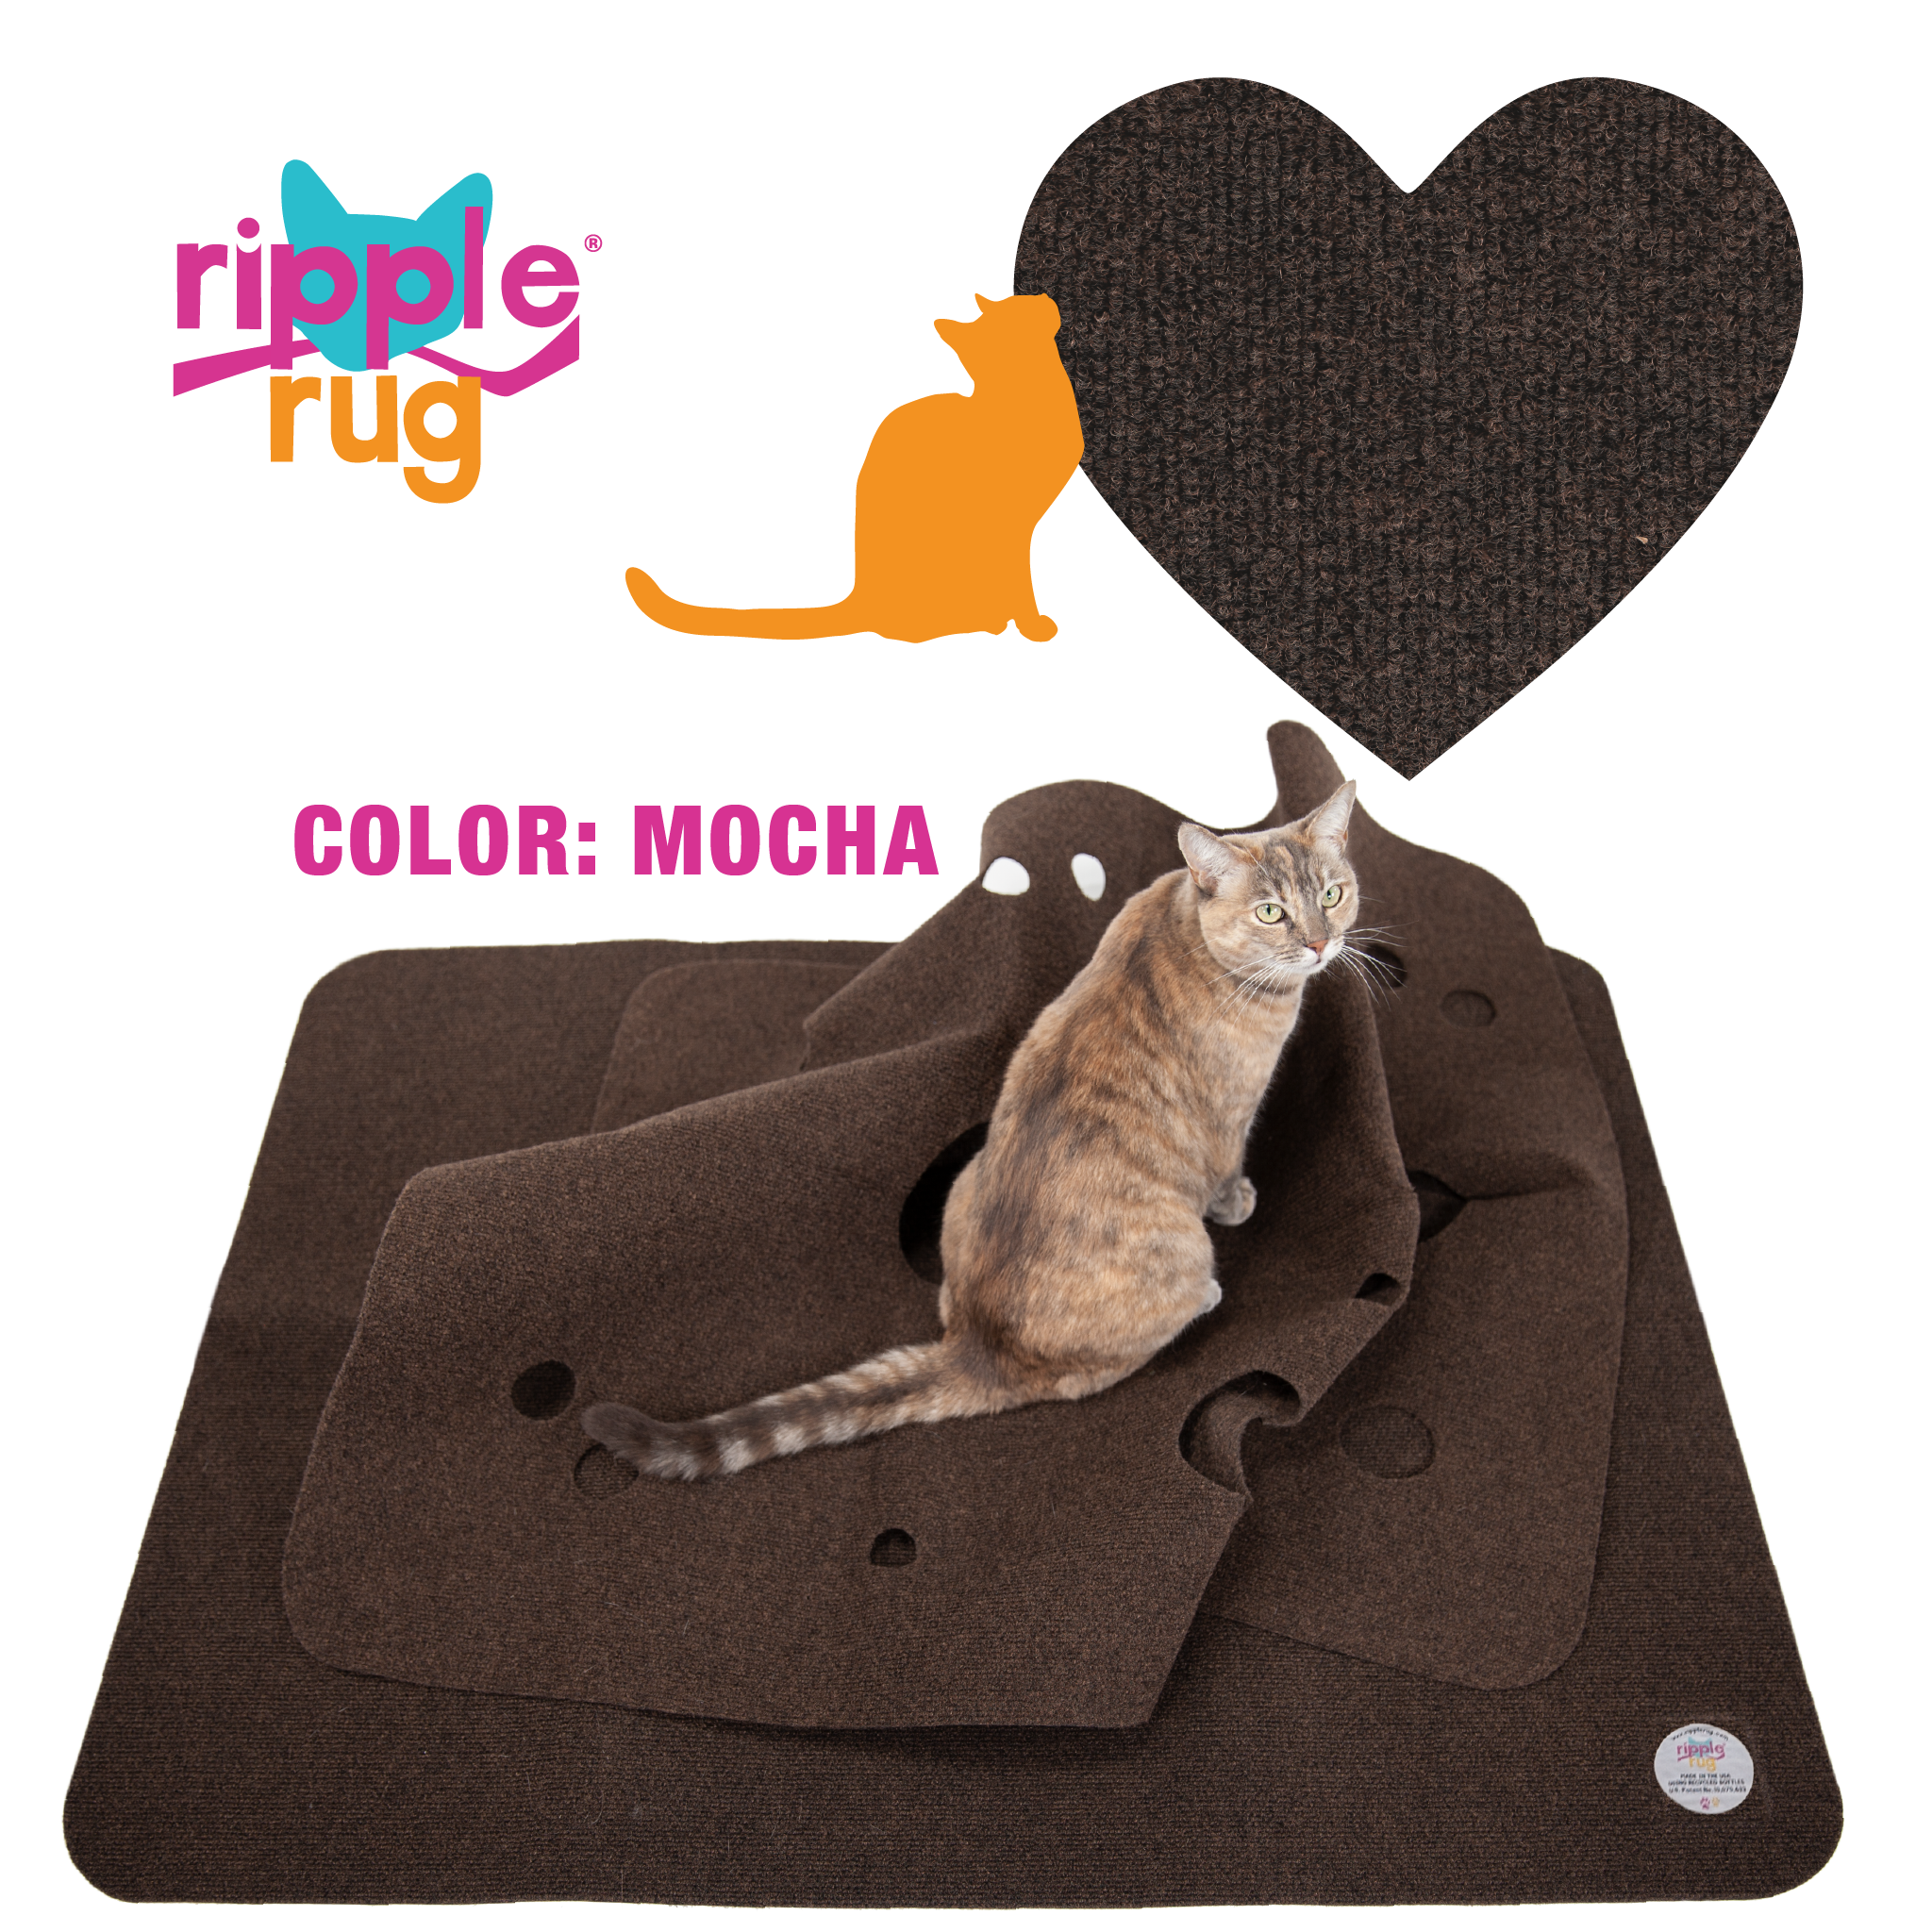  SnugglyCat The Ripple Rug - Cat Activity Play Mat - Made in  USA - Insulated Base Keeps Kitty Warm - Fun Interactive Play - Training -  Scratching - Bed Mat : Pet Supplies